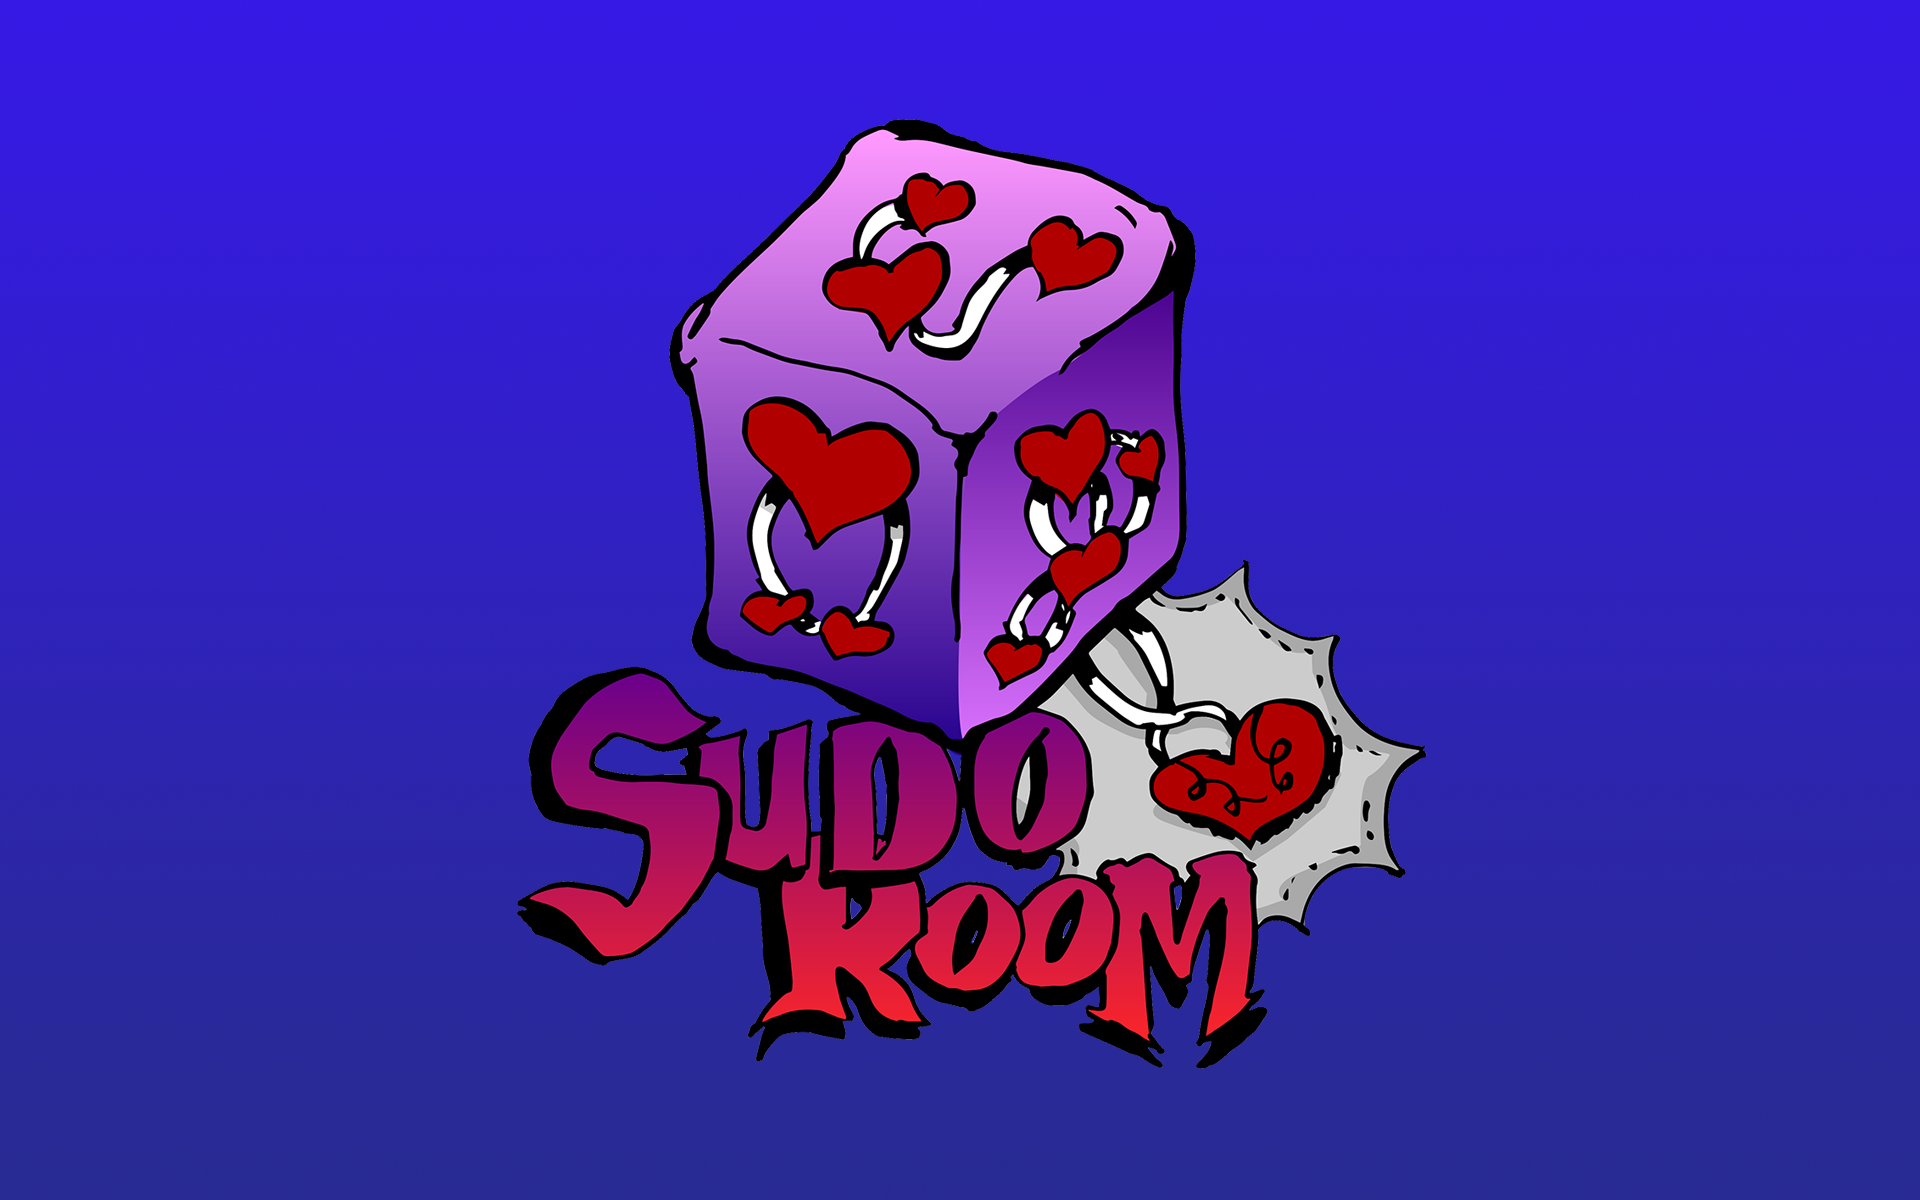 A love interpretation of the connected SudoRoom Cube